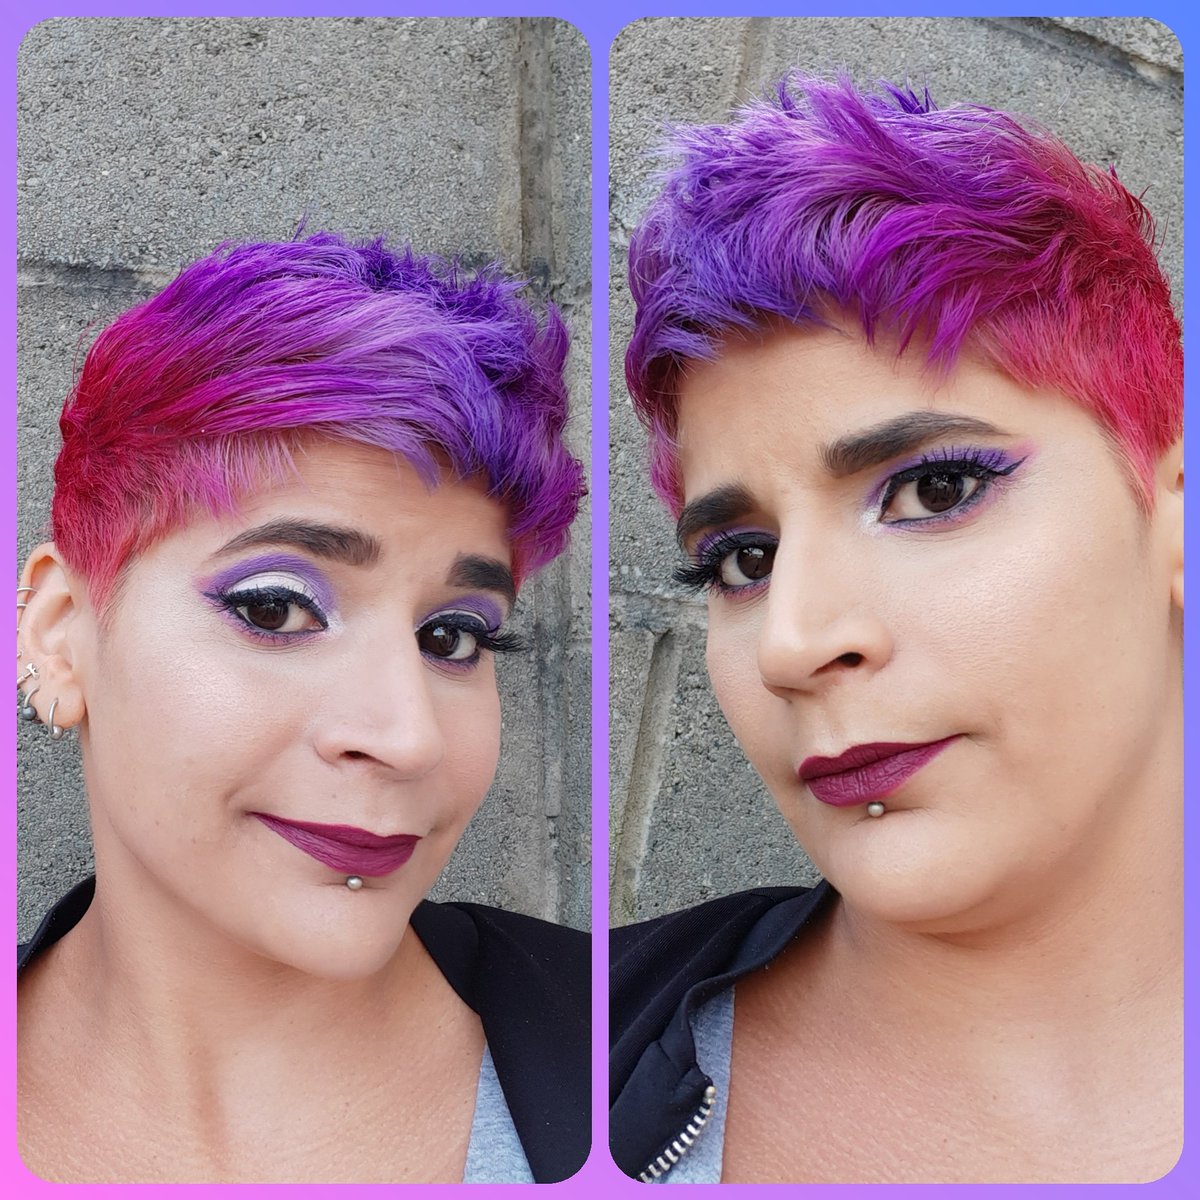 Trying to keep busy and active on the page so here's another make up look that you'd never see me wear but I just wanted to show you what I can do 😁
Thought I'd match the eyes with the hair this time 😝
#GoodnessGraces_ #LouthChat #MakeUpArtist #NeverFiltered #IAmInMyGarden